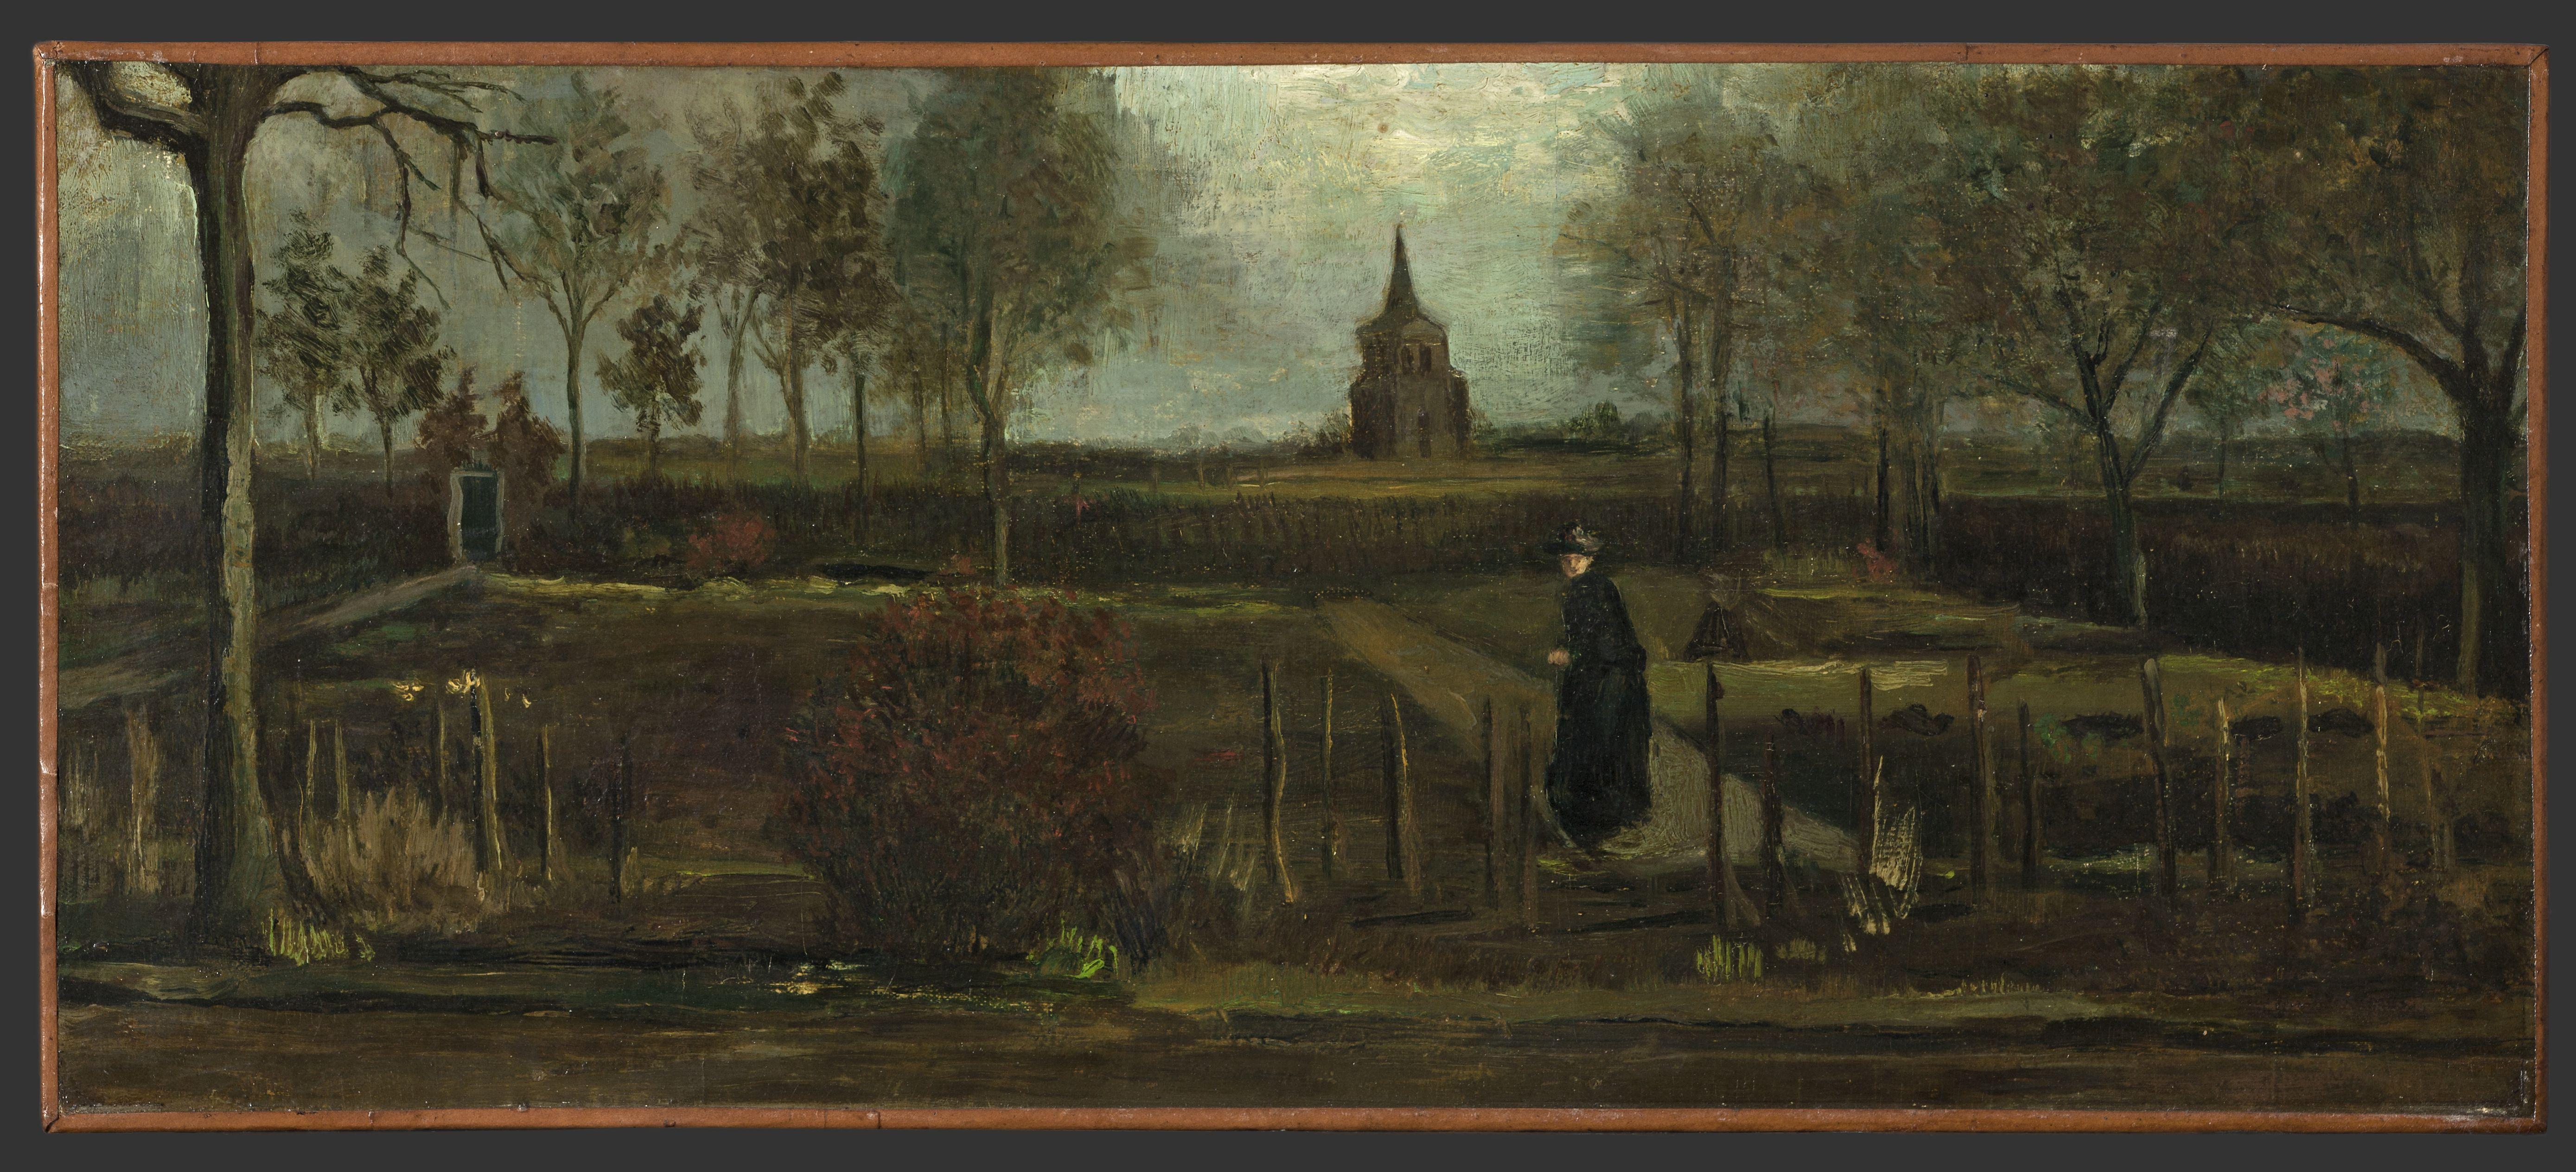 Van Gogh Theft Focuses Attention On Empty Museums Security During Covid 19 Crisis